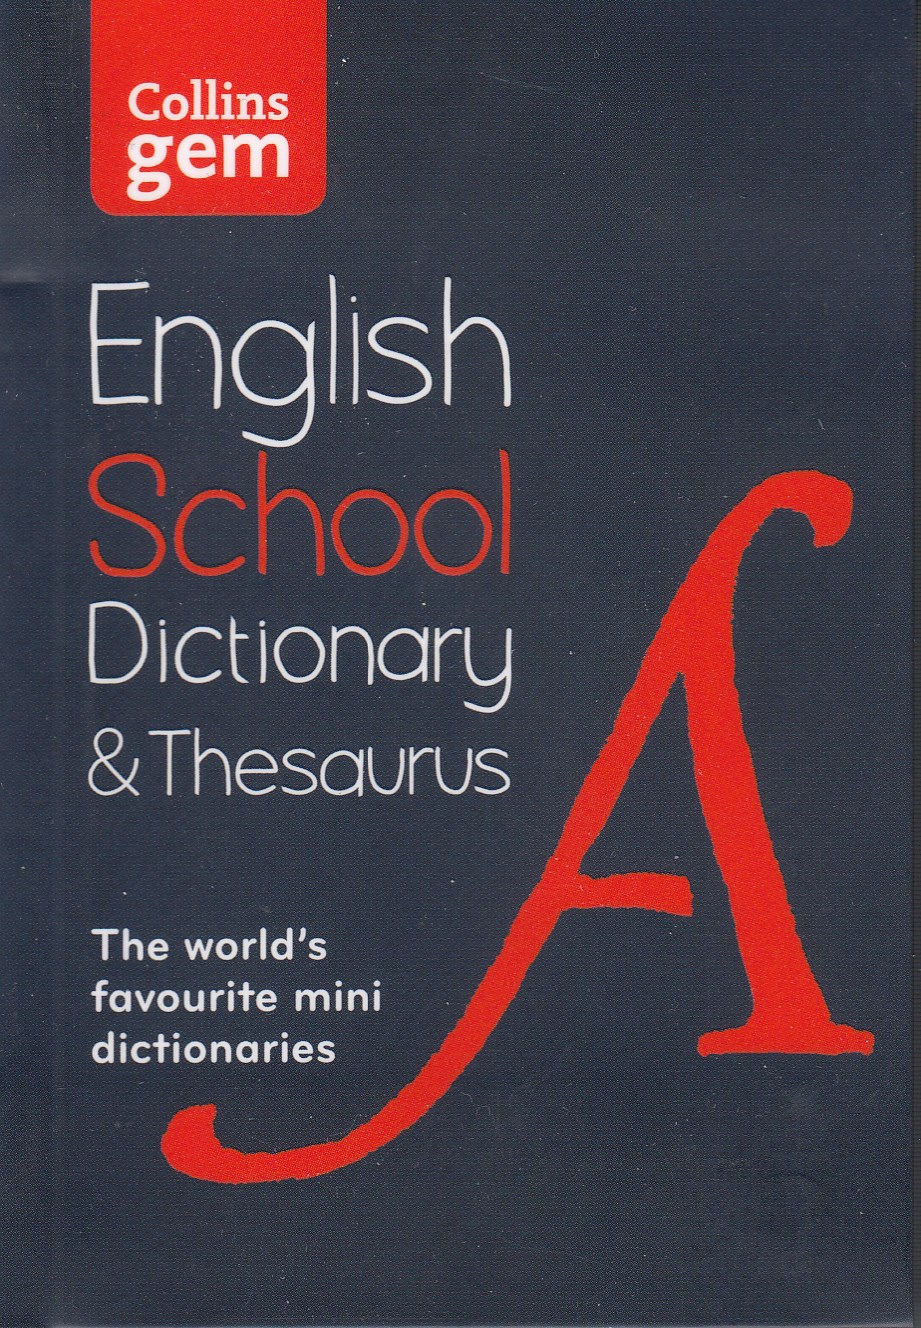 COLLINS GEM ENGLISH SCHOOL DICTIONARY&THESARUS (3ED) by DK Today